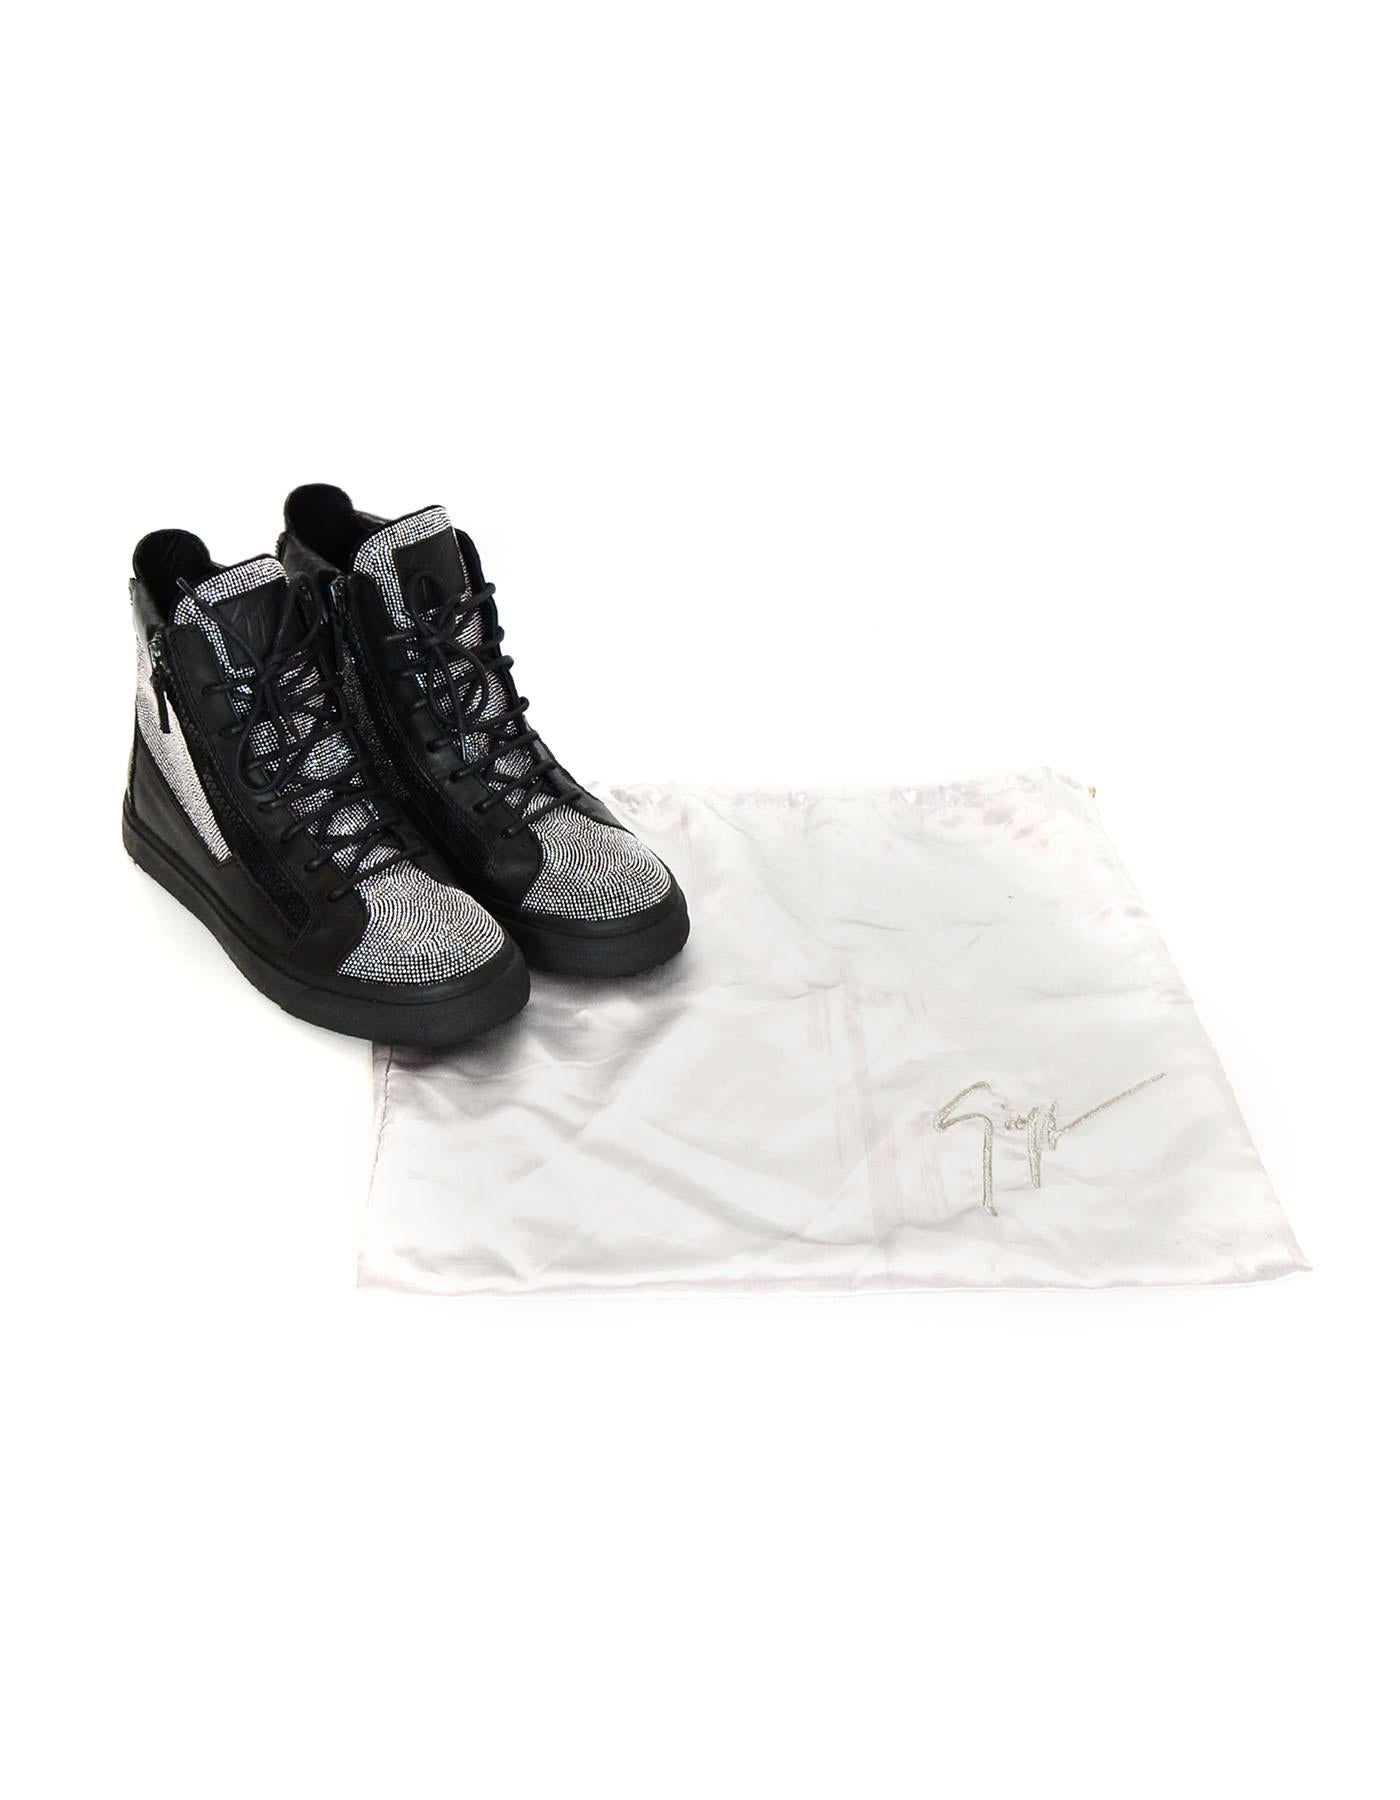 Giuseppe Zanotti Black High Top Lace Up Side Zipper Unisex Sneakers With Crystal and Dust Bag 

Made In: Italy 
Color: Black and silver crystal 
Hardware: Black side and back zippers
Materials: Leather, rubber soles, crystal mesh detailing